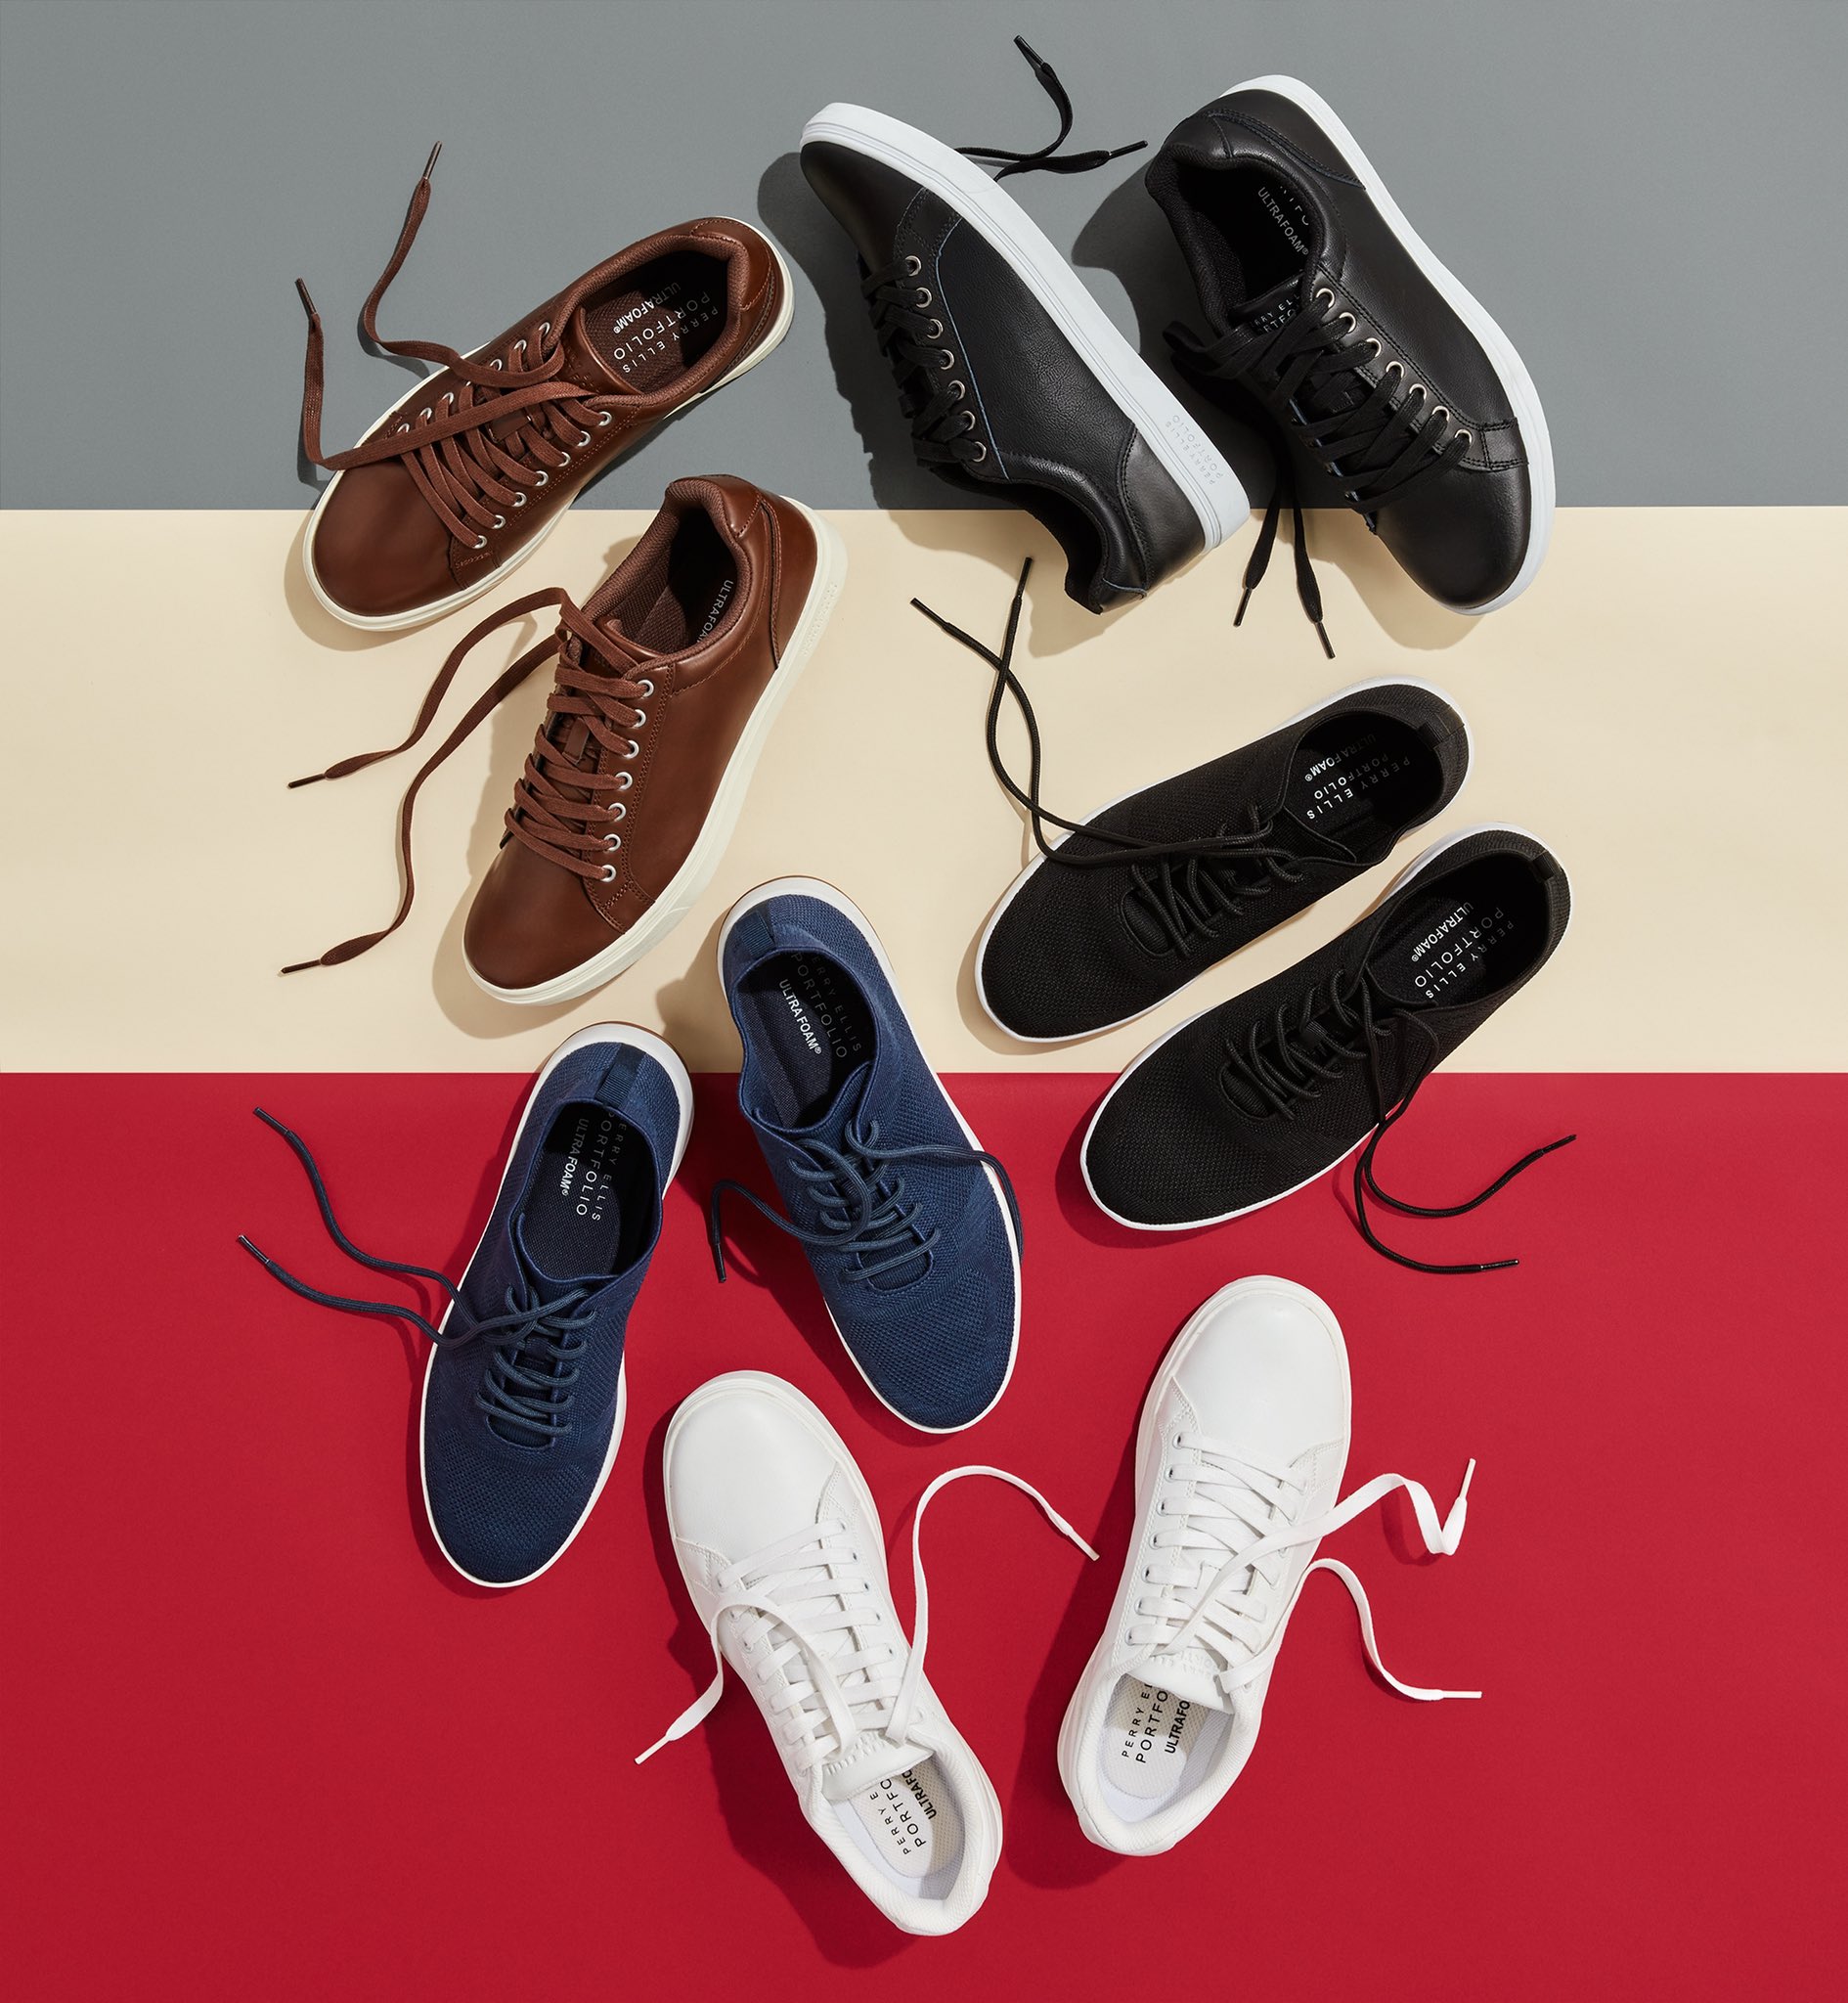 Perry Ellis on X: "Finally, the perfect pair of shoes designated for each day of work week. #LifeReadySince1976 Now: Tread Sneaker: https://t.co/qyb7kzfw4c Vincent Sneaker: https://t.co/A2IGWDIdn5 / X